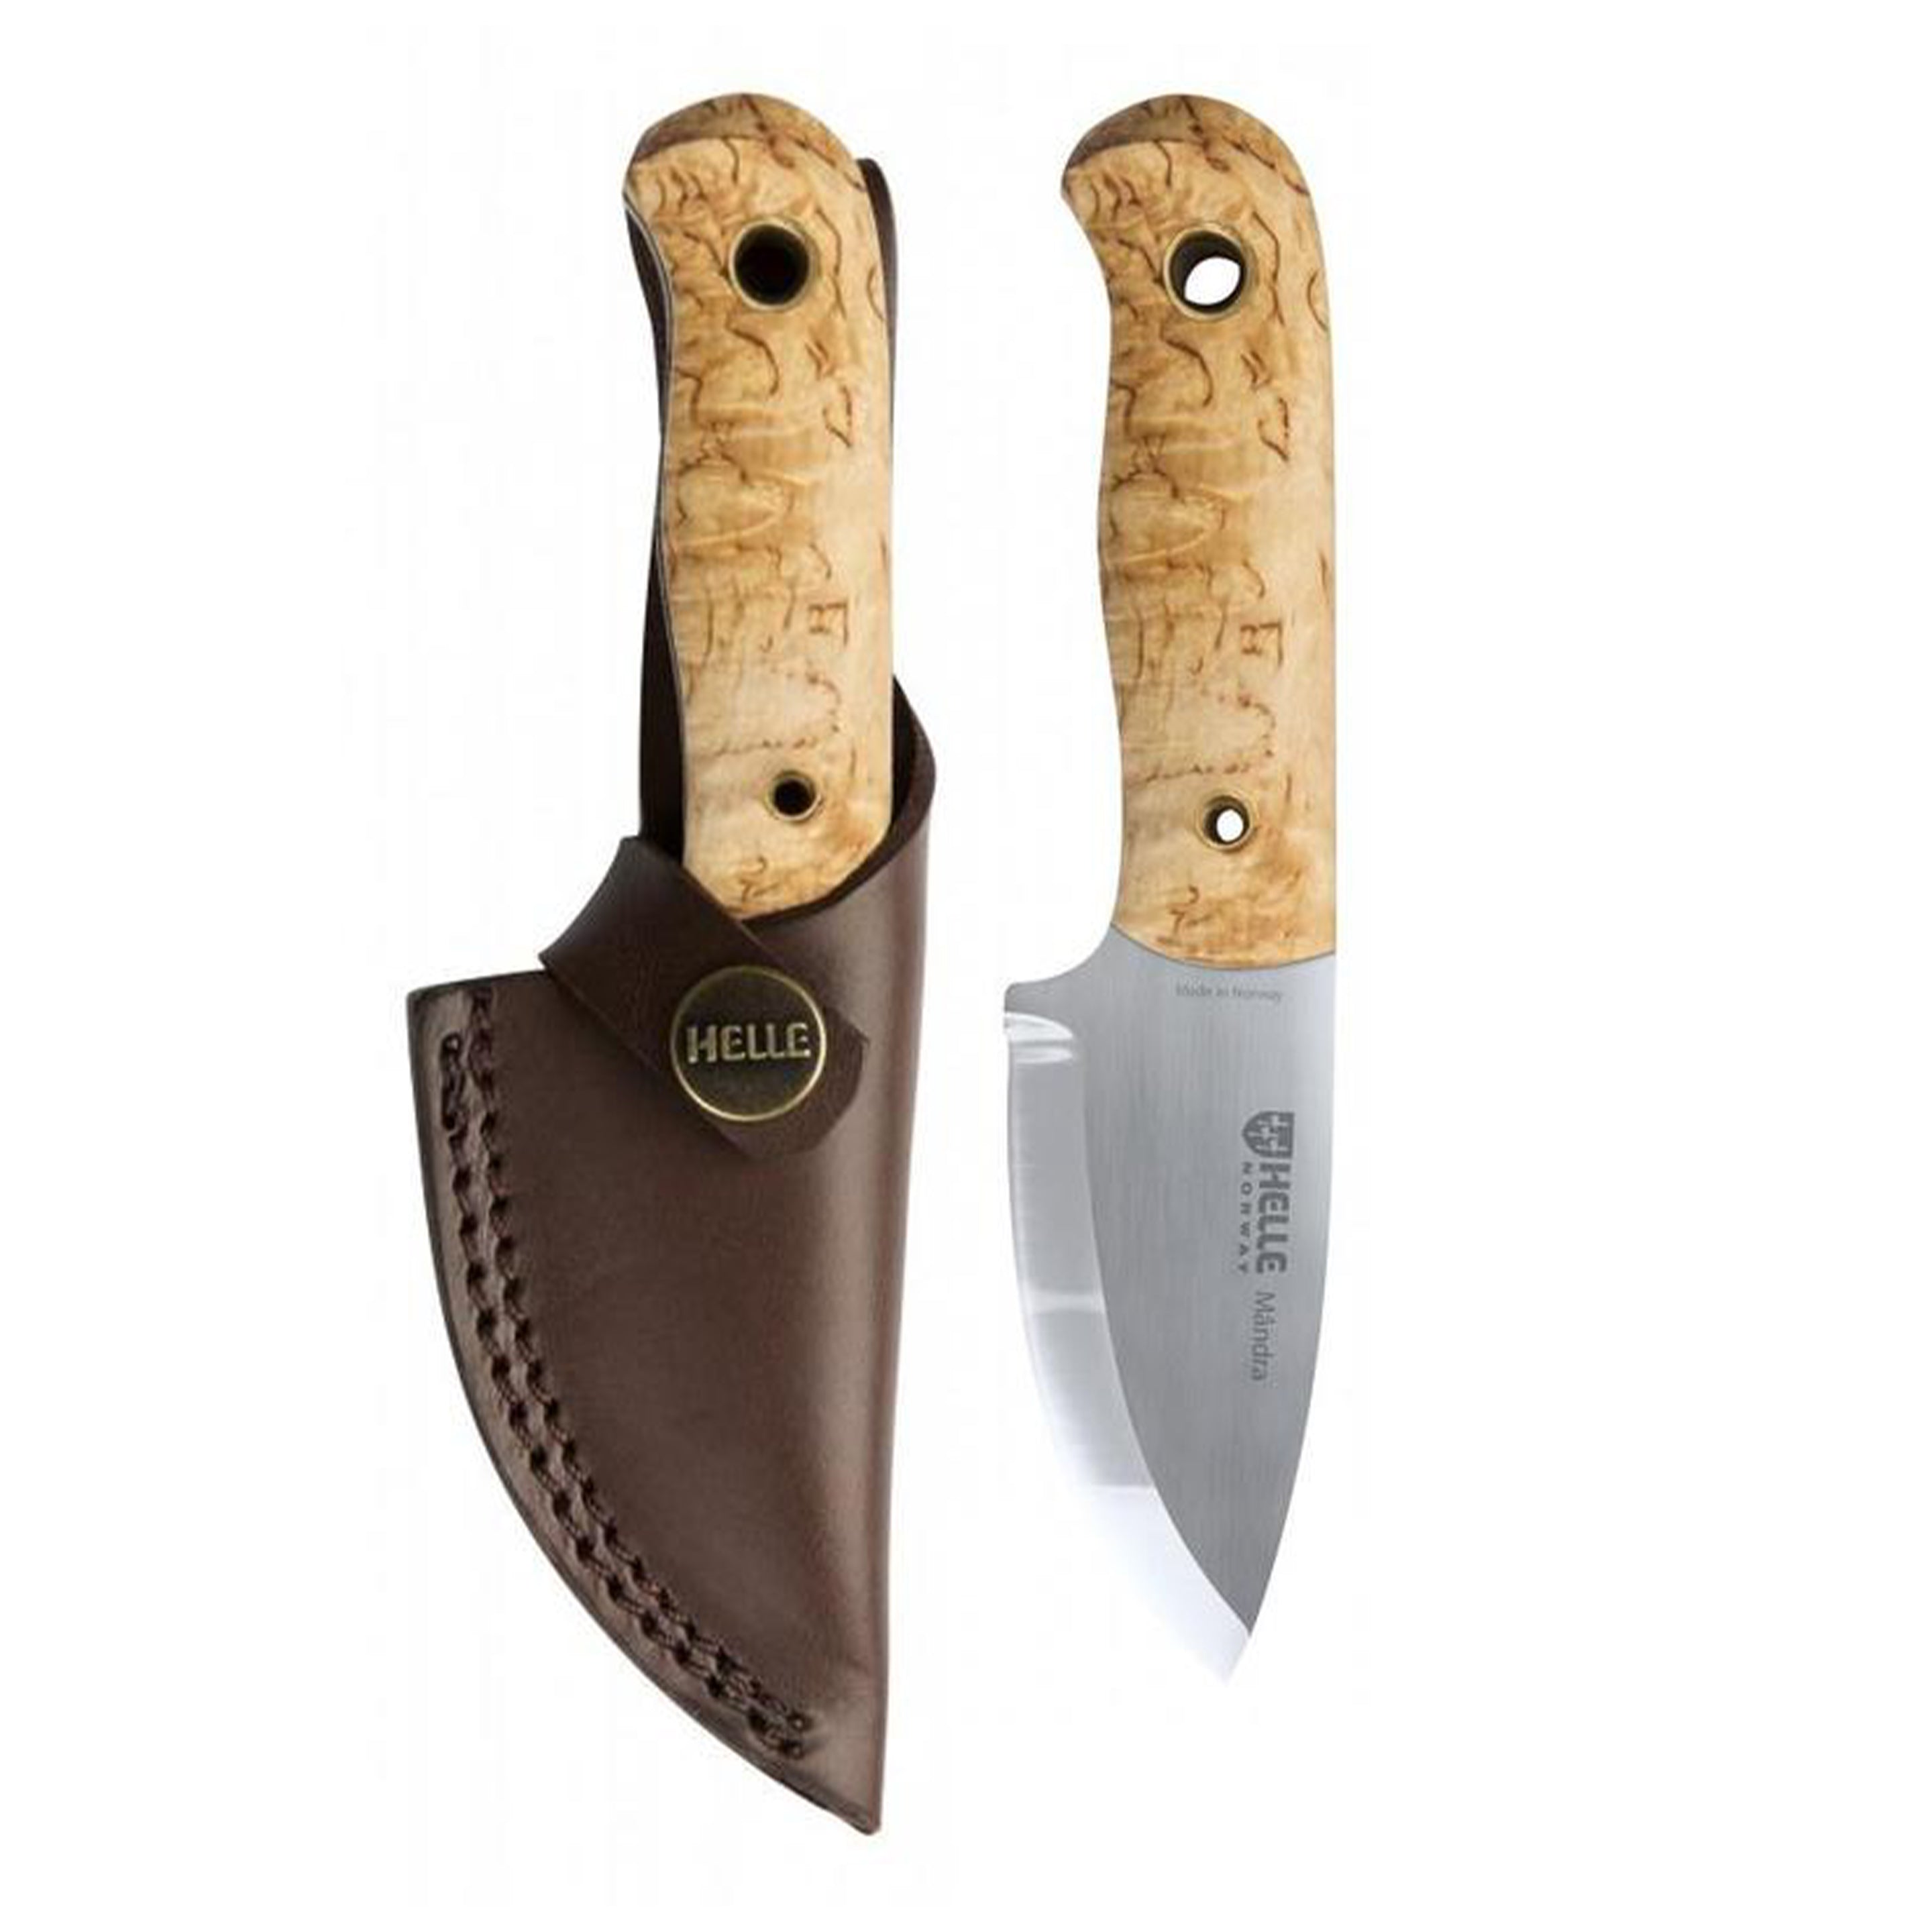 Helle Norway Harmoni Curly Birch & Walnut Fixed Blade Knife - Red